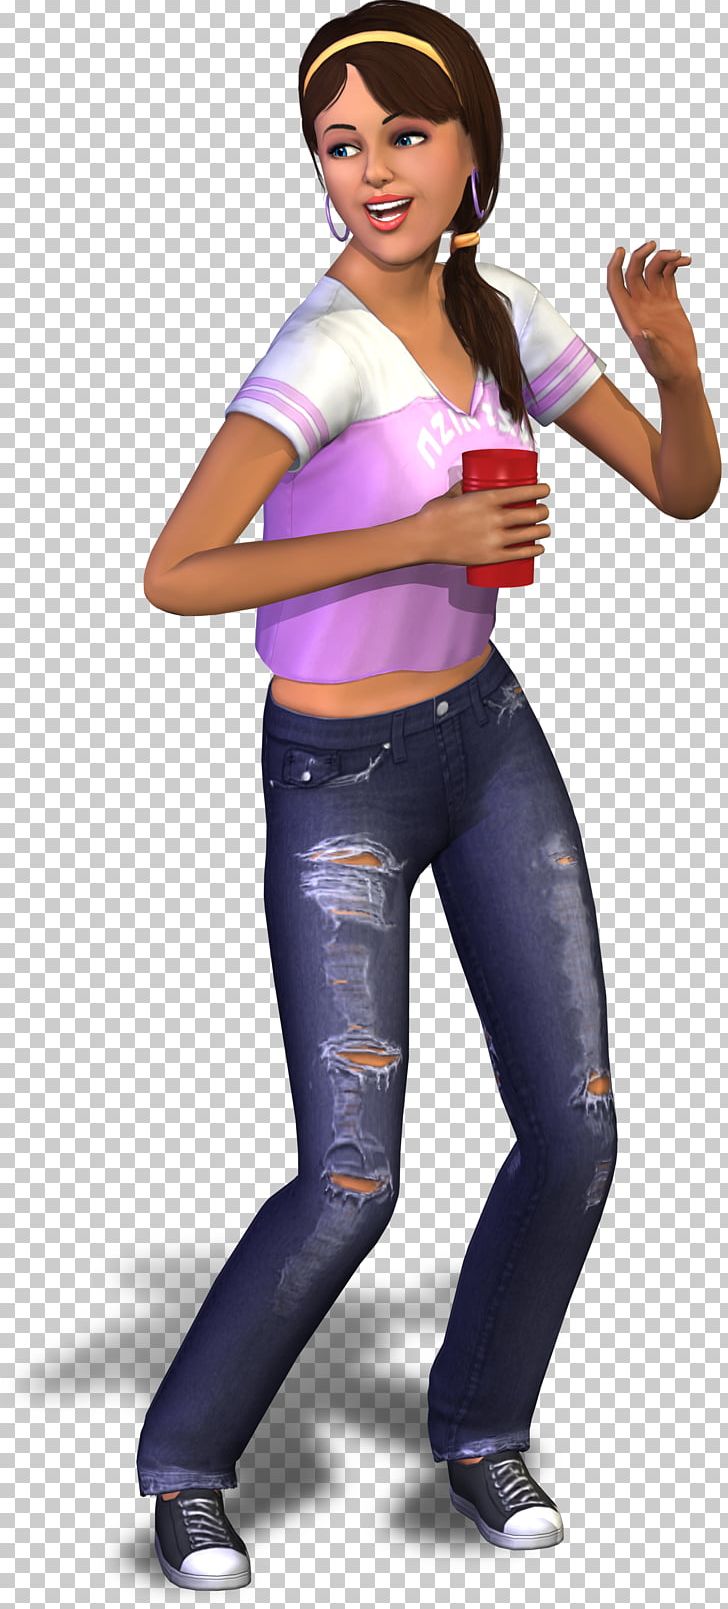 The Sims 3: University Life The Sims 2: University The Sims 2: Apartment Life The Sims 2: Nightlife The Sims 3: Seasons PNG, Clipart, Abdomen, Active Undergarment, Arm, Expansion Pack, Girl Free PNG Download